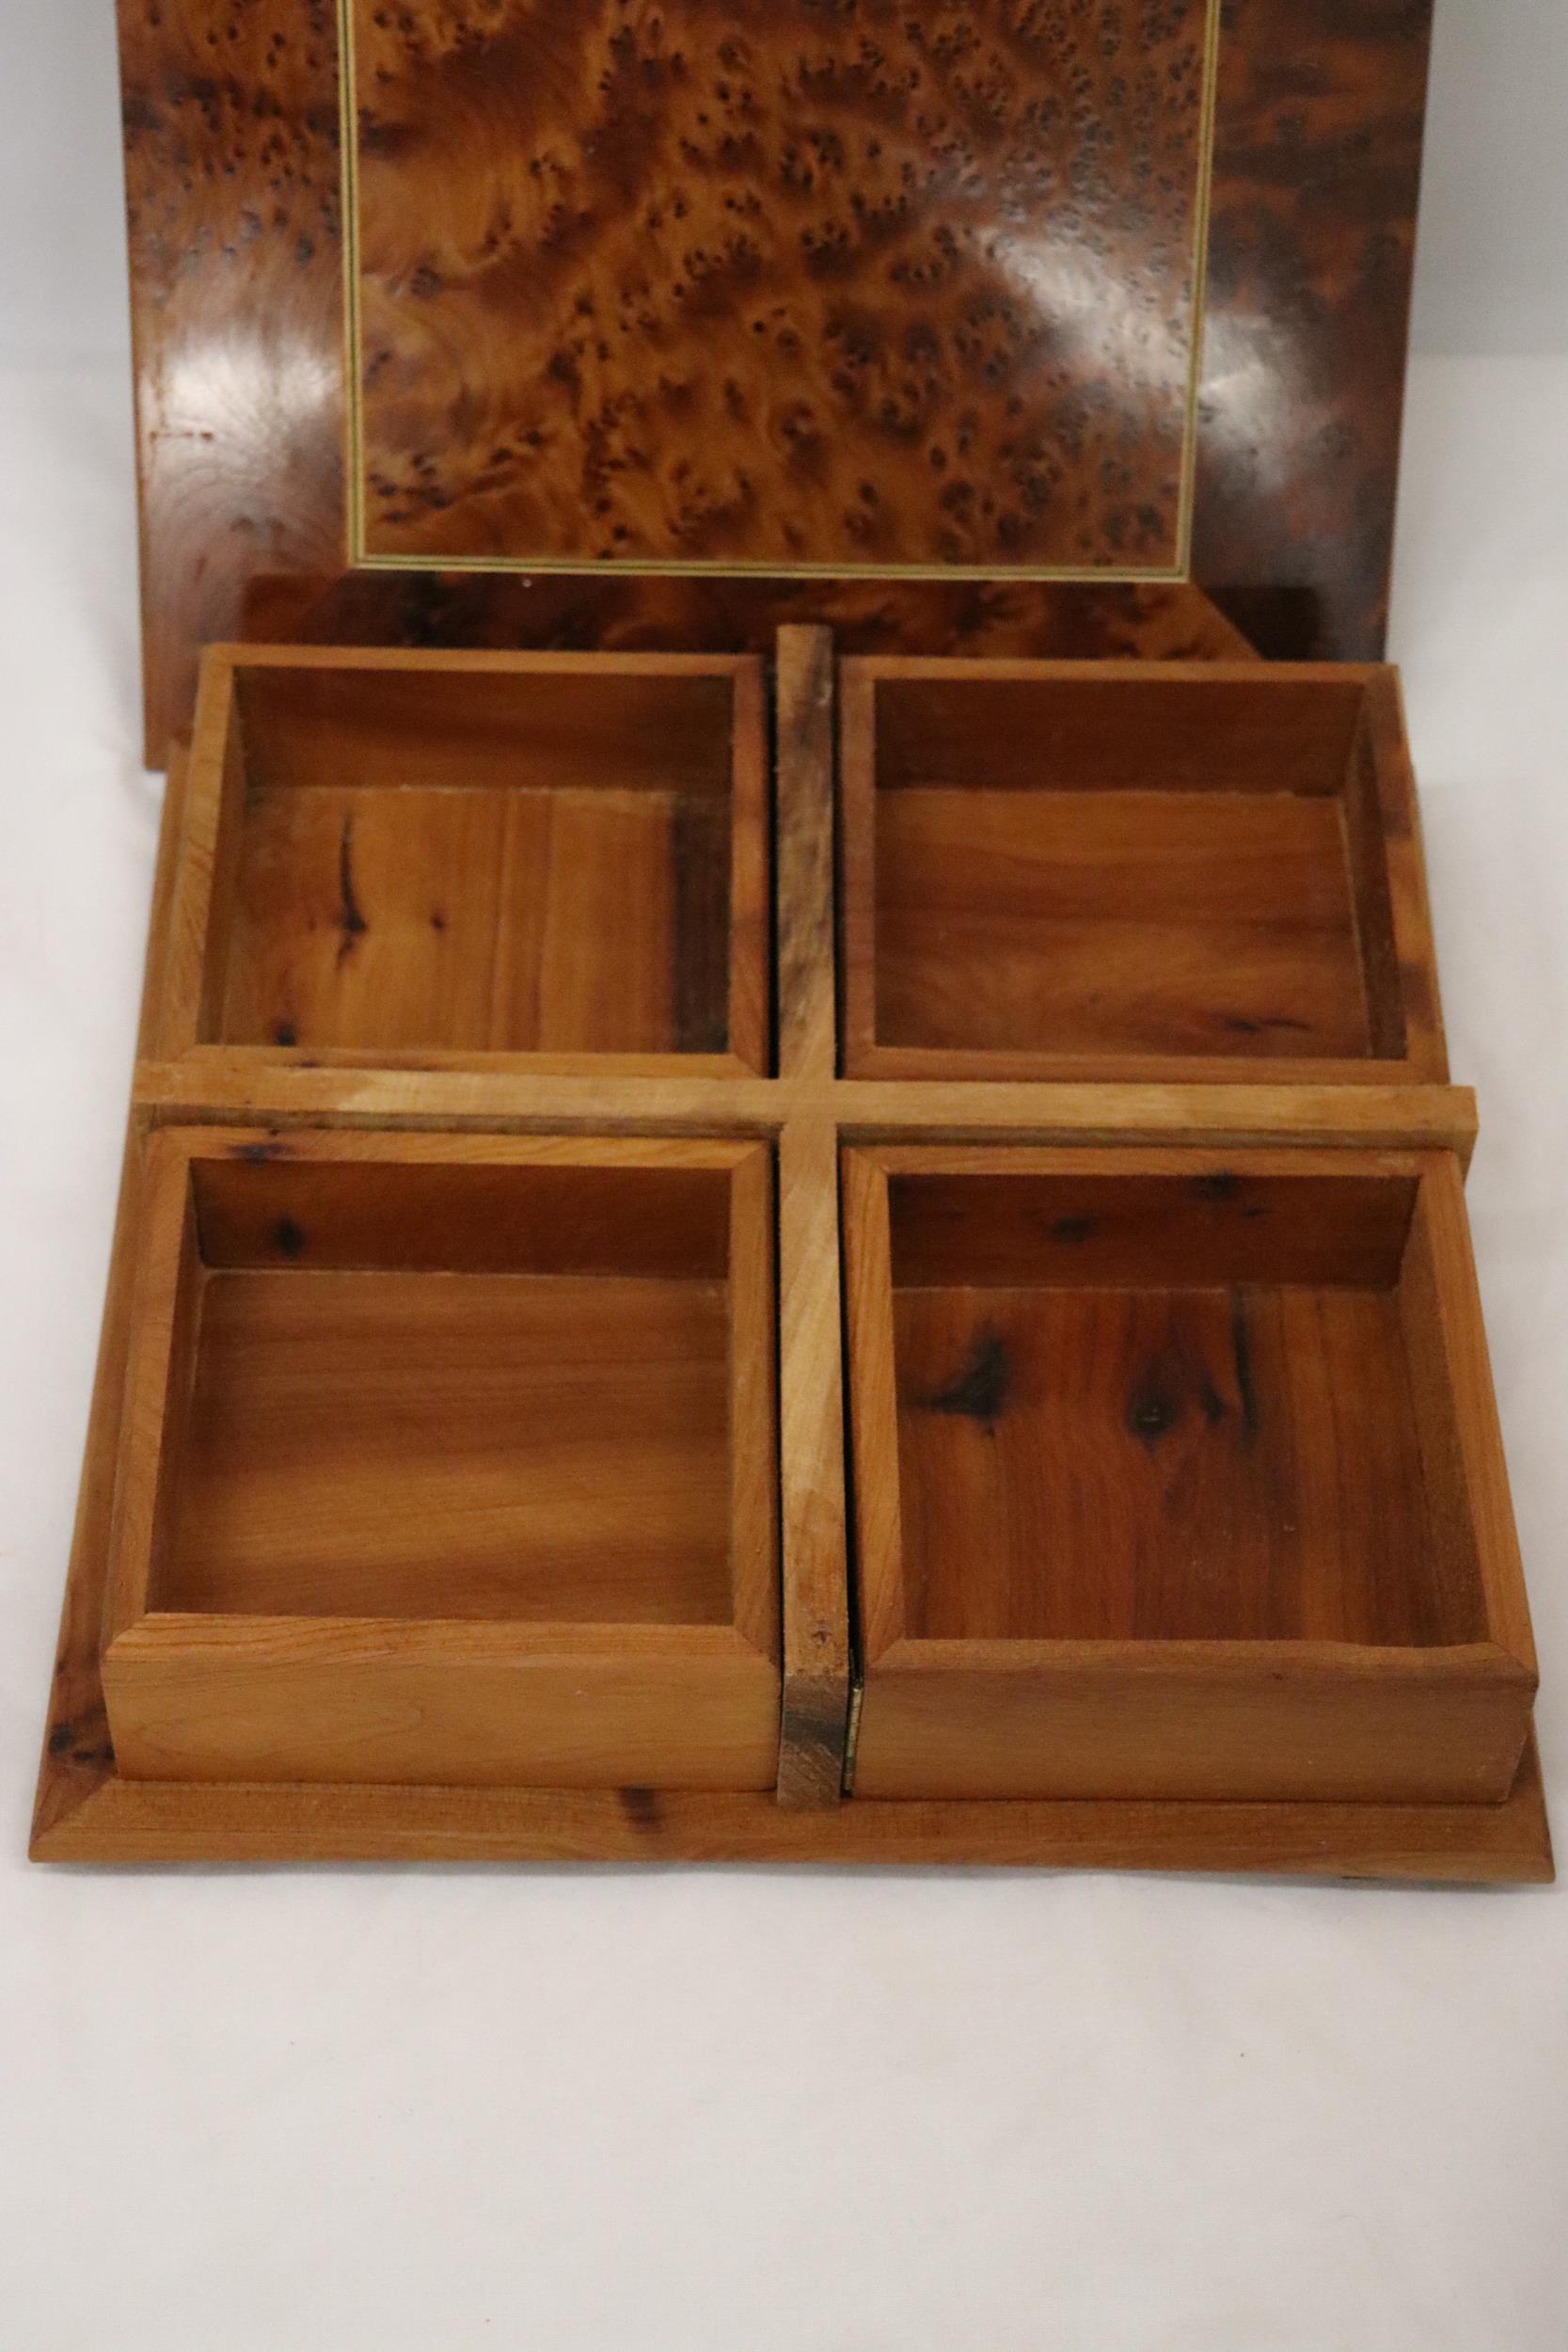 A THUYA WOODEN BOX WITH FOUR COMPARTMENTS TOGETHER WITH A WOODEN DESK TIDY AND PUZZLE BOX - Image 3 of 8